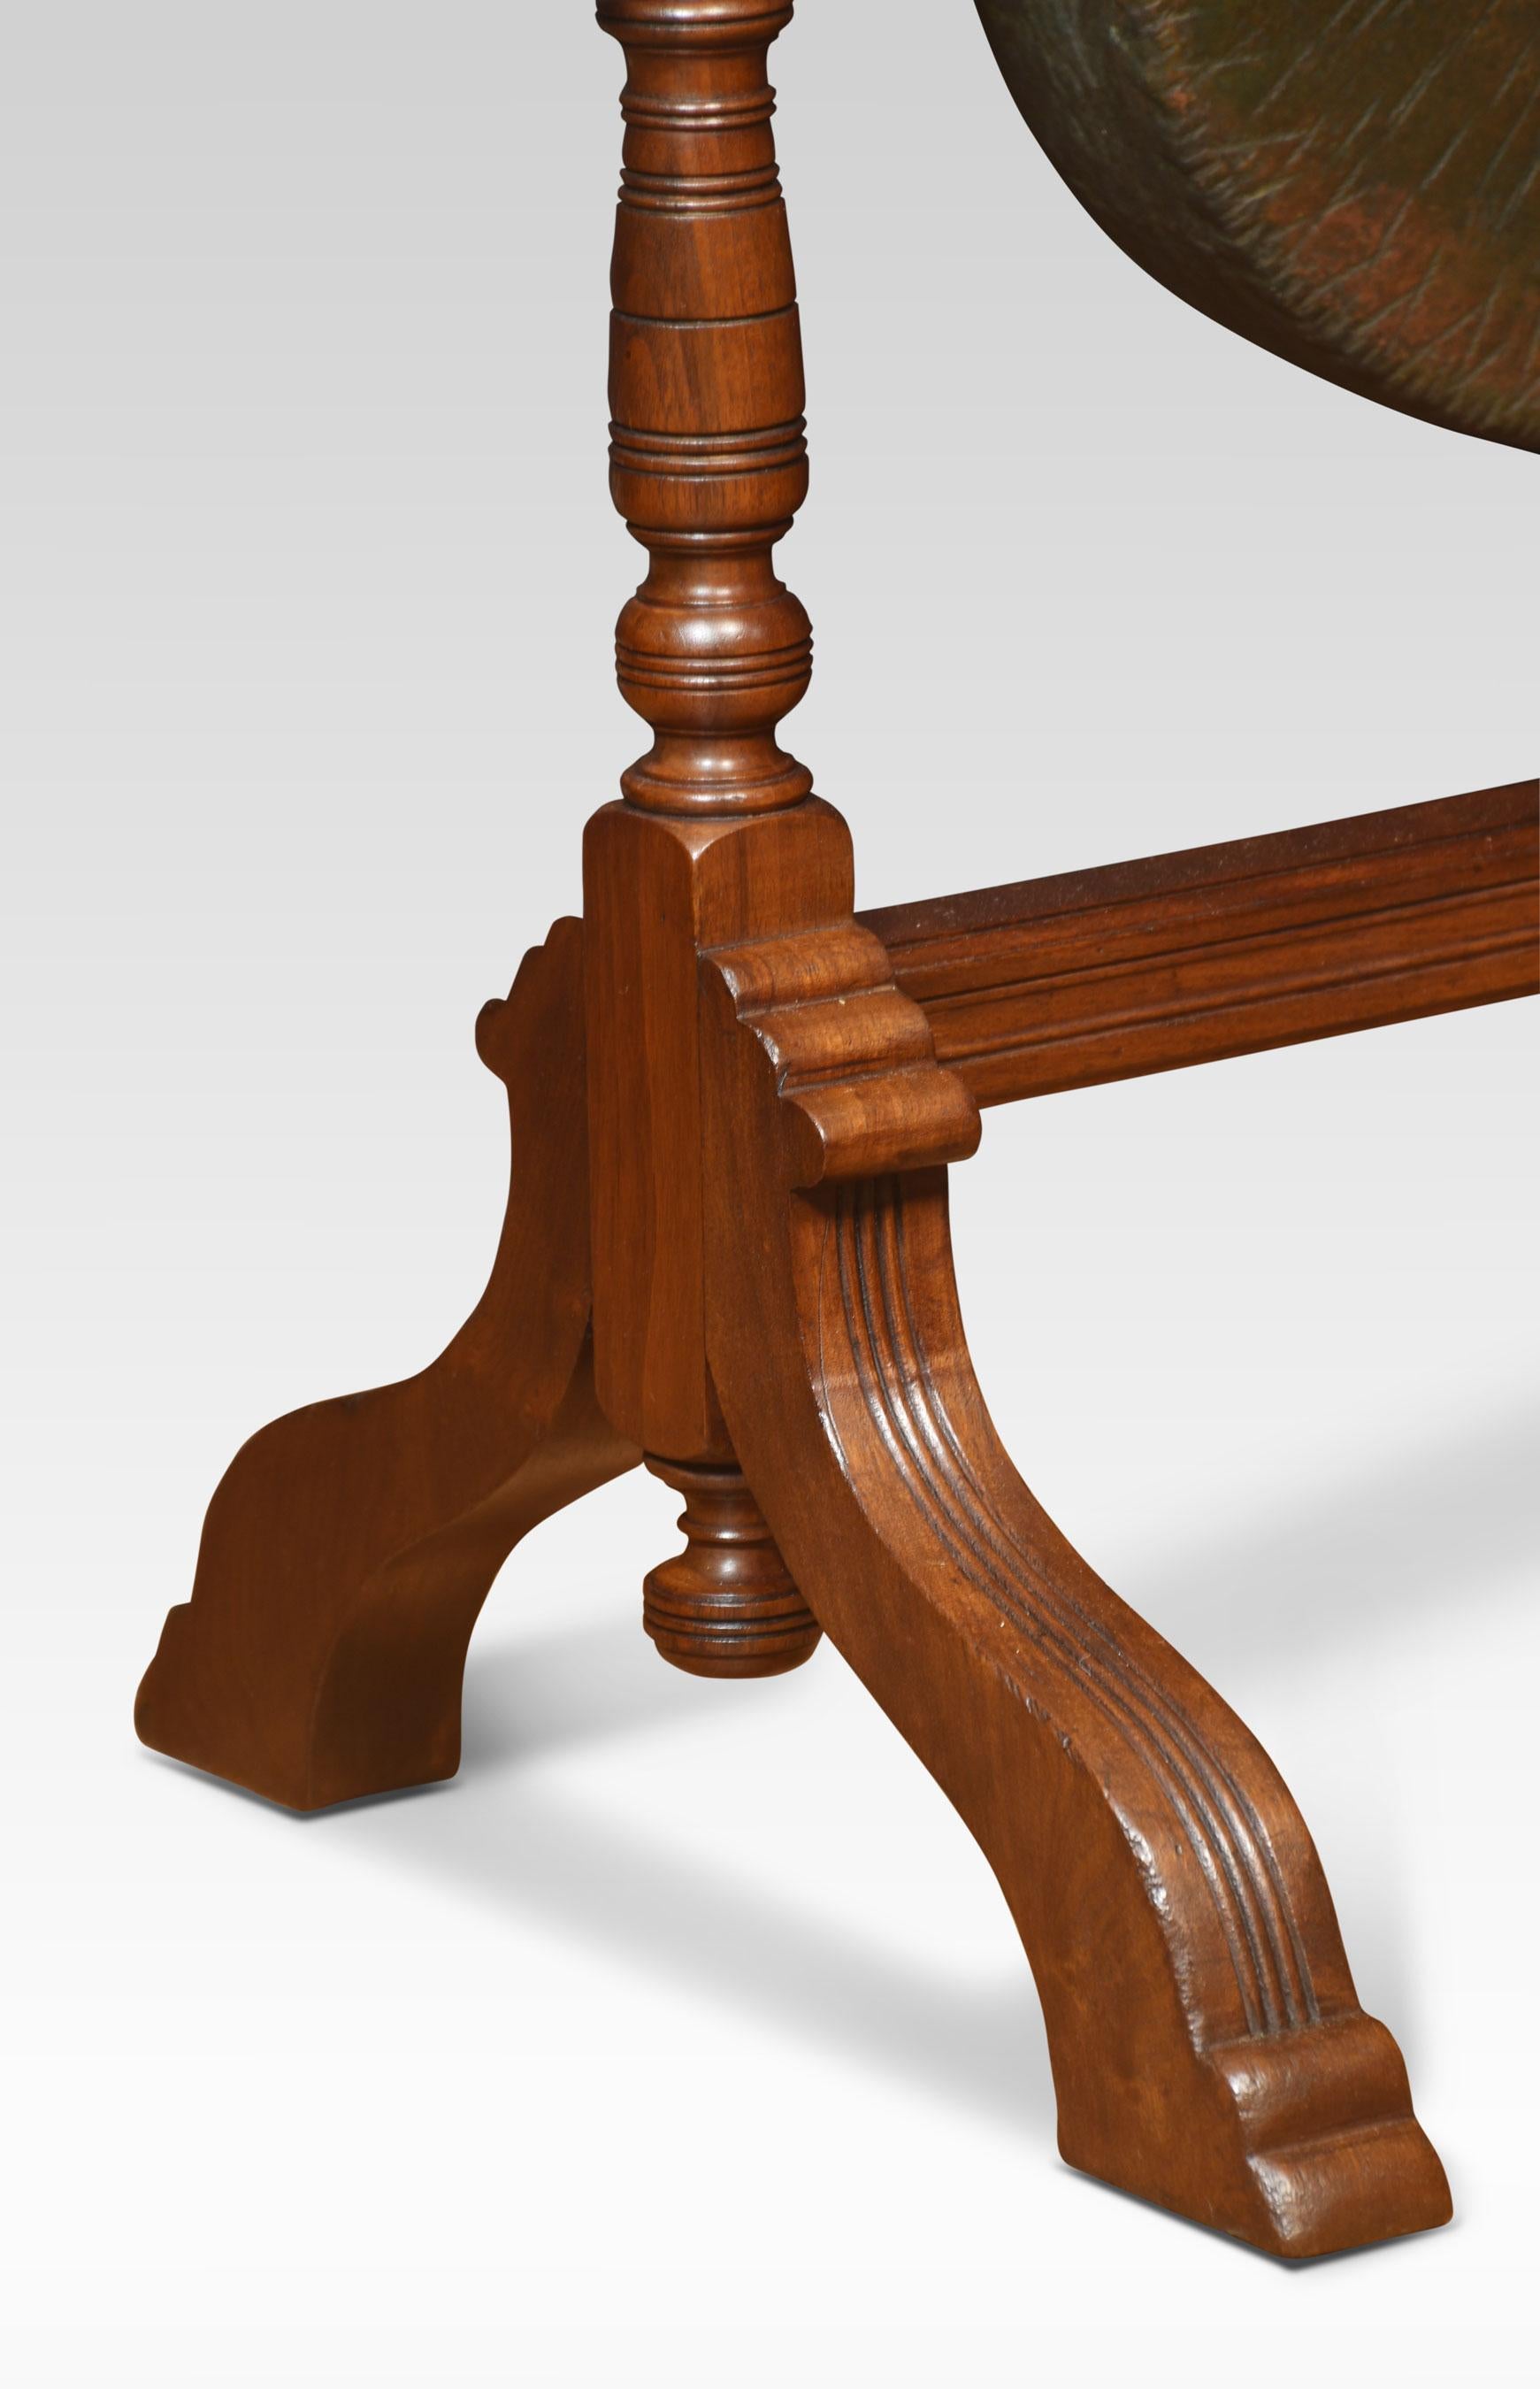 Large Carved walnut dinner gong, the frame with flower head carved decoration. Flanked by carved uprights. All raised up on trestle base, with a striker.
Dimensions
Height 39.5 Inches
Width 26 Inches
Depth 19 Inches